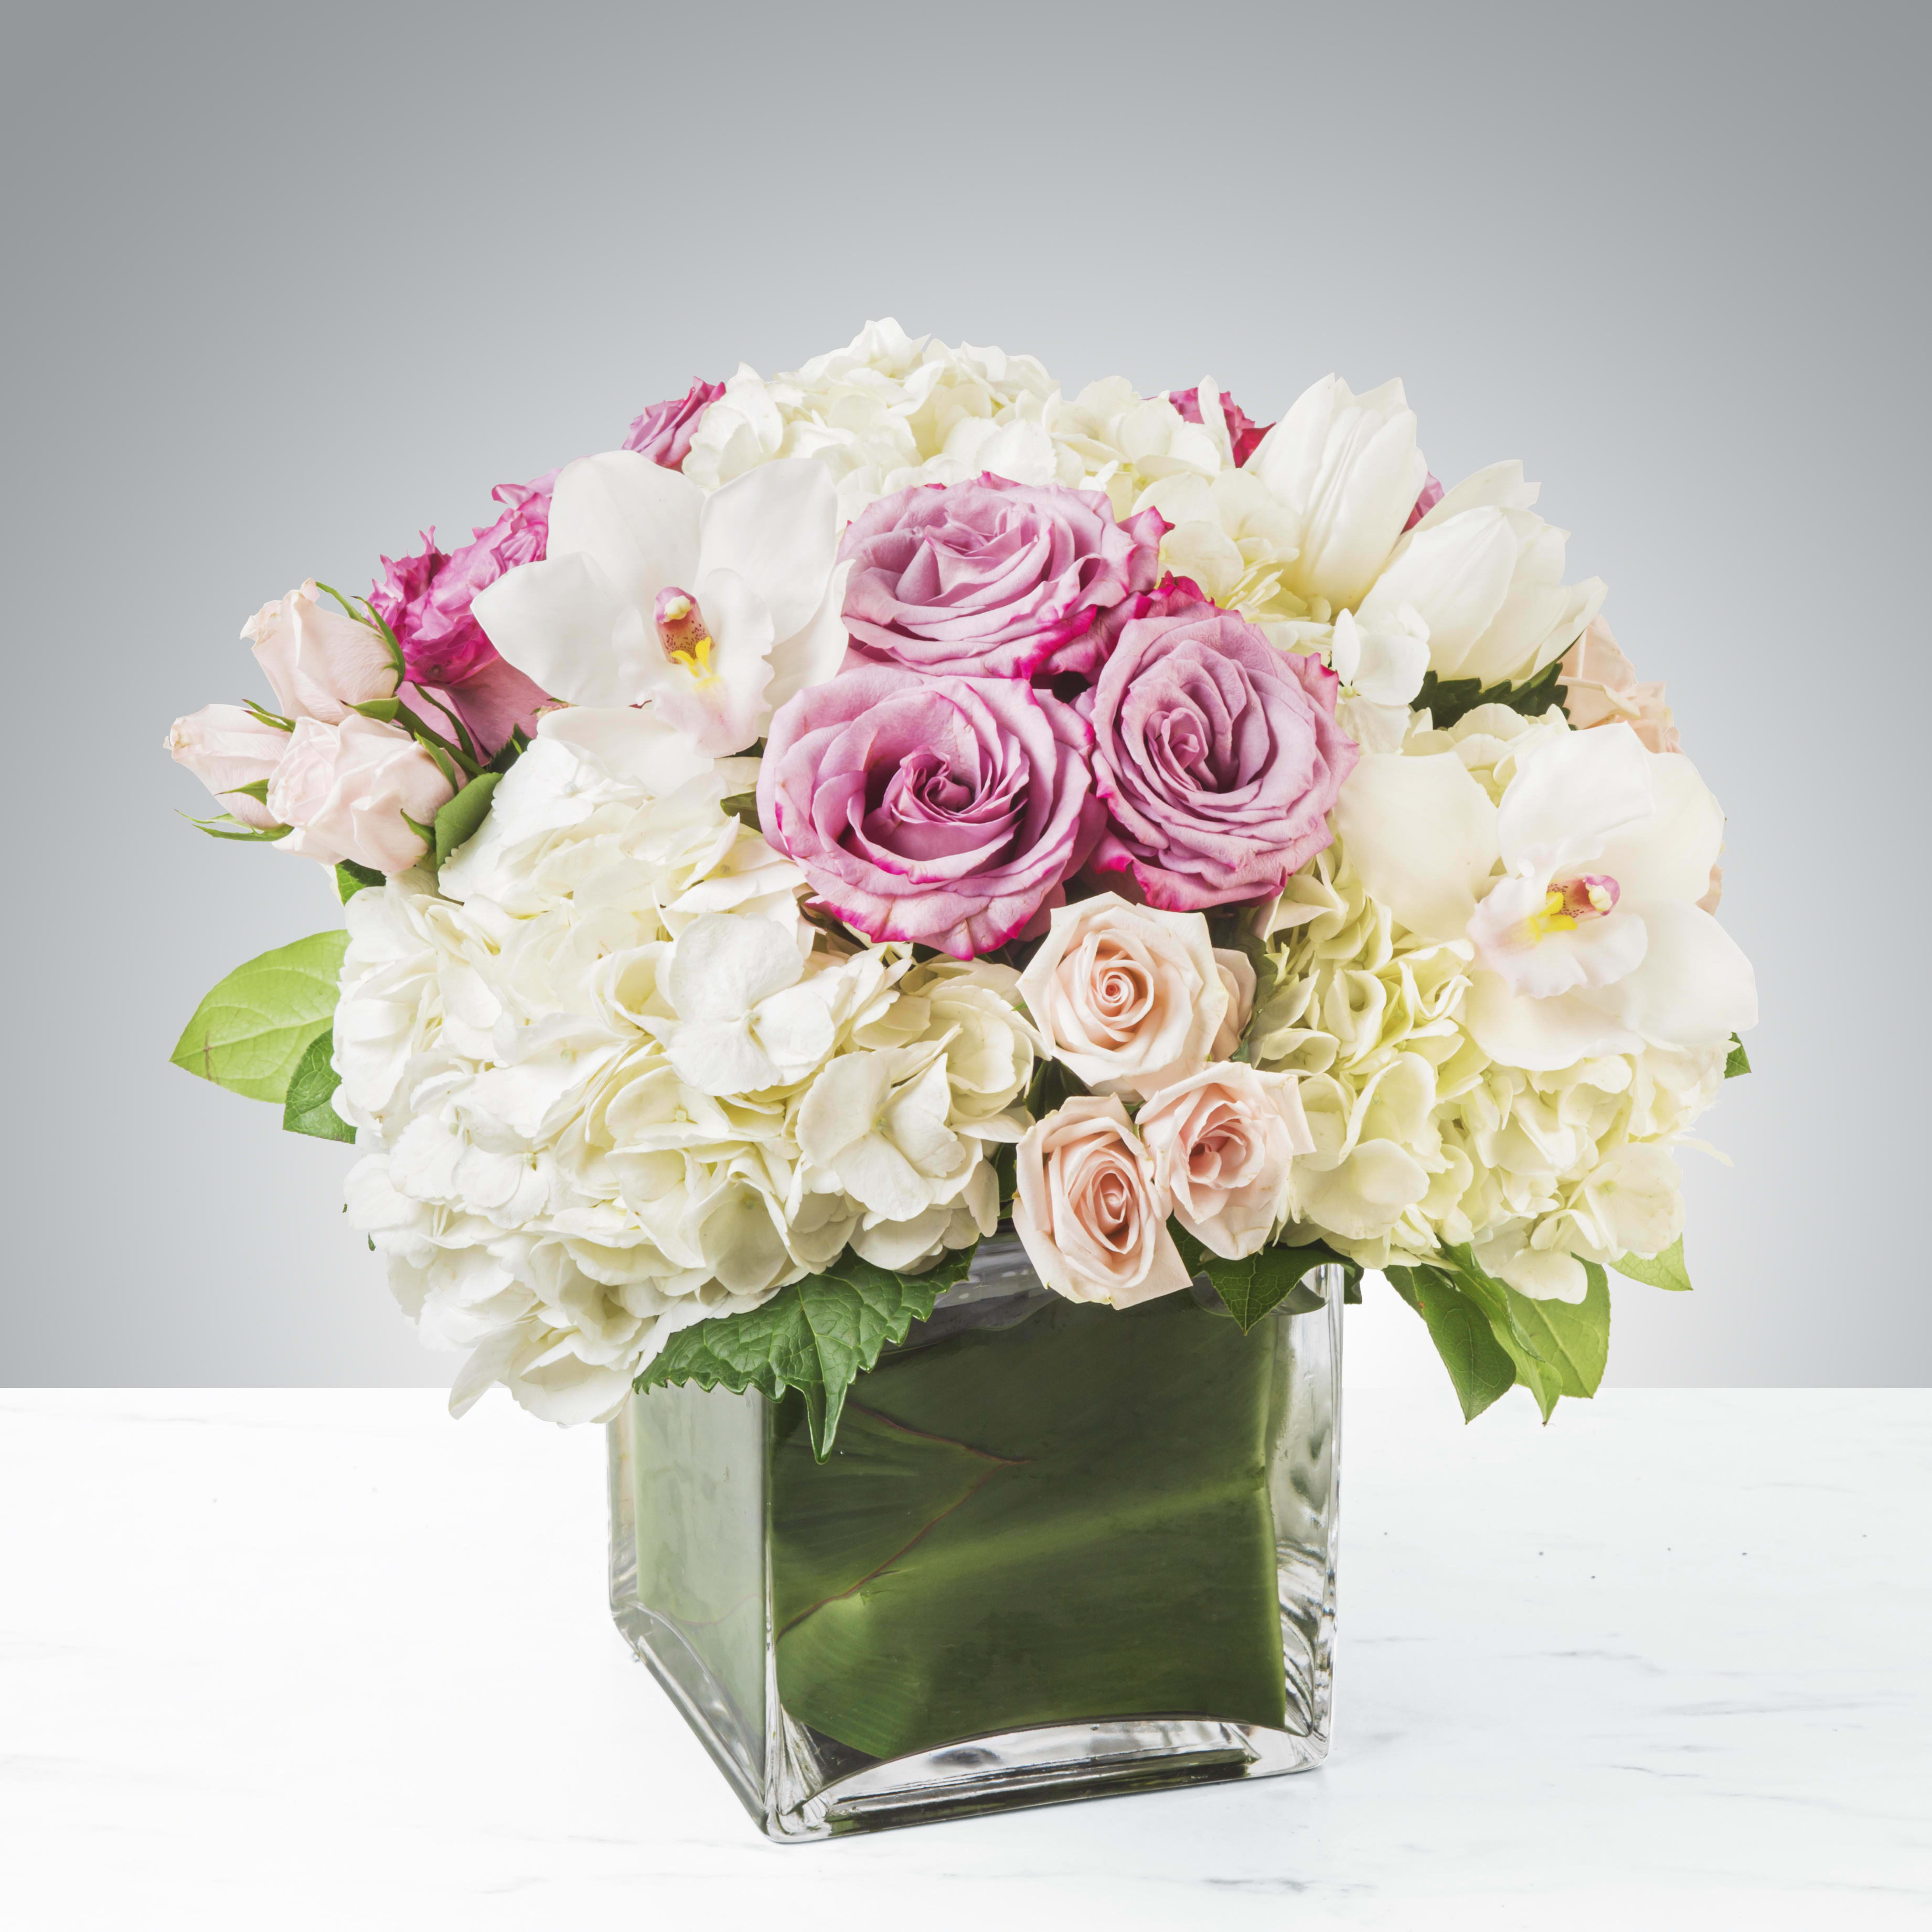 Carolina by BloomNation™ - Classic and Beautiful, this large arrangement whispers luxury. Soft pinks, whites and creams come together to create an appealingly feminine gift. Perfect for welcoming a new baby, wishing happy birthday or saying congratulations.   APPROXIMATE DIMENSIONS: 13&quot; W X 13&quot; H  May be a glass cube or cylinder vase